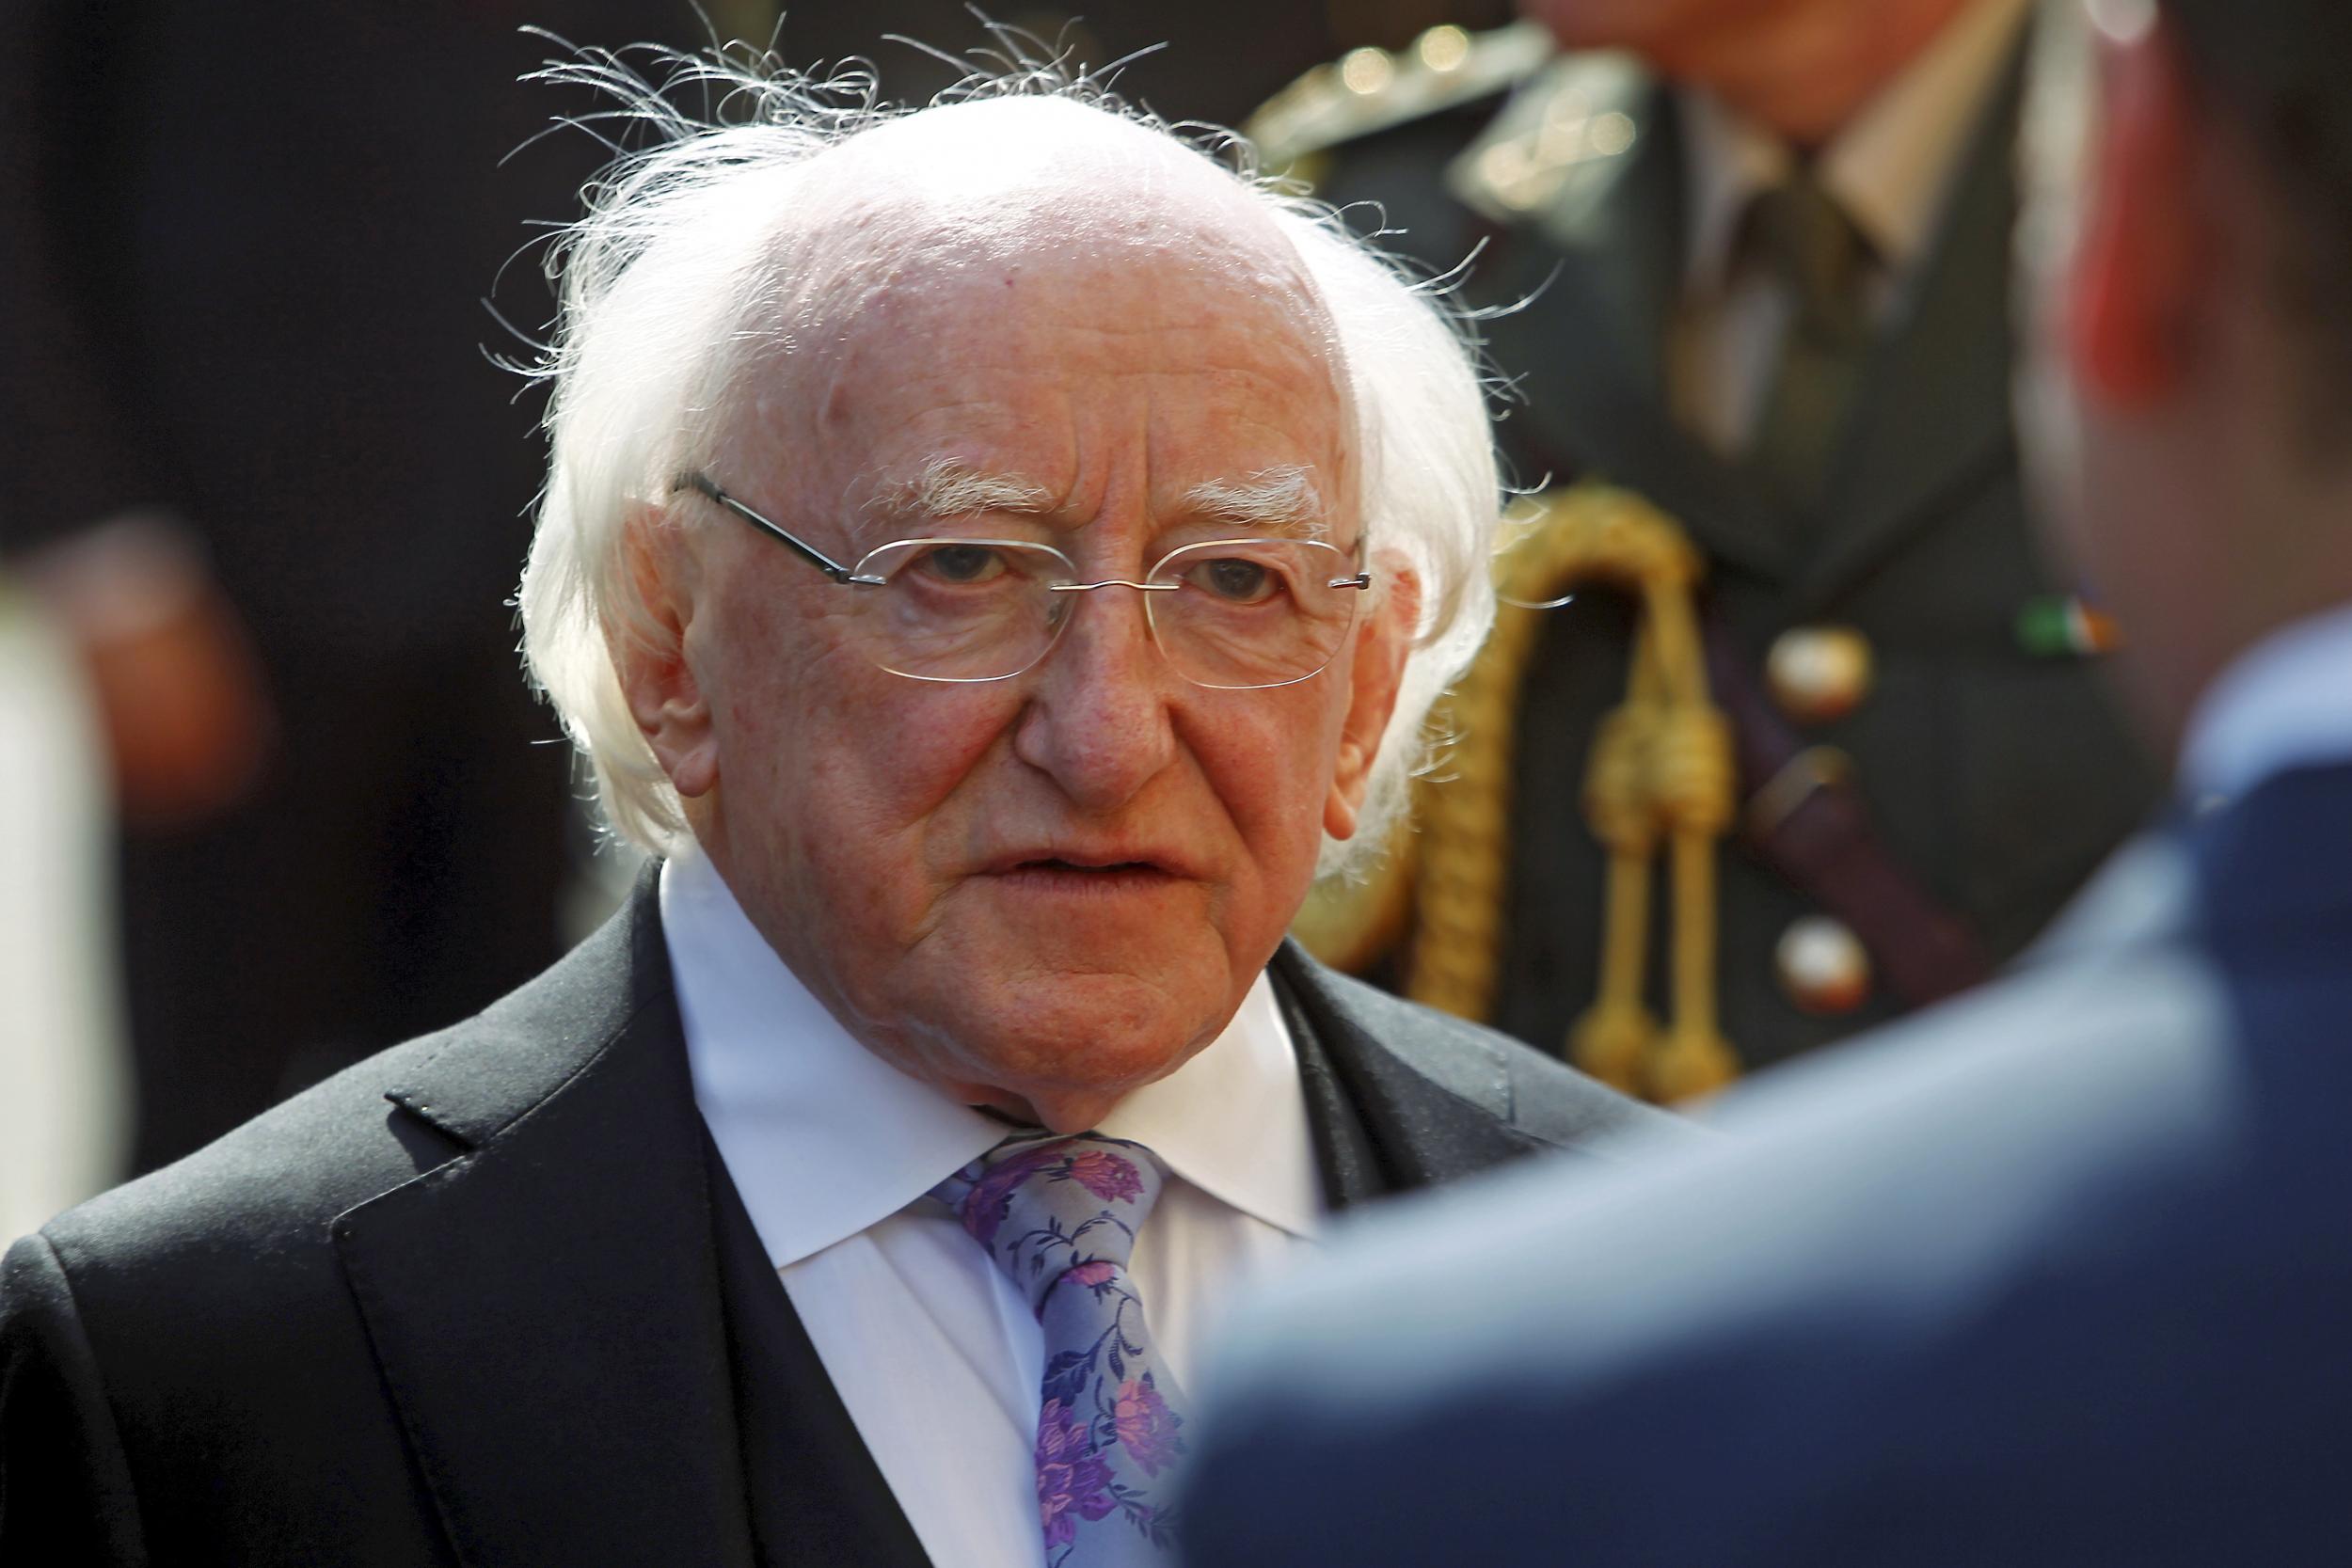 Michael D Higgins has served as President of Ireland since 2011